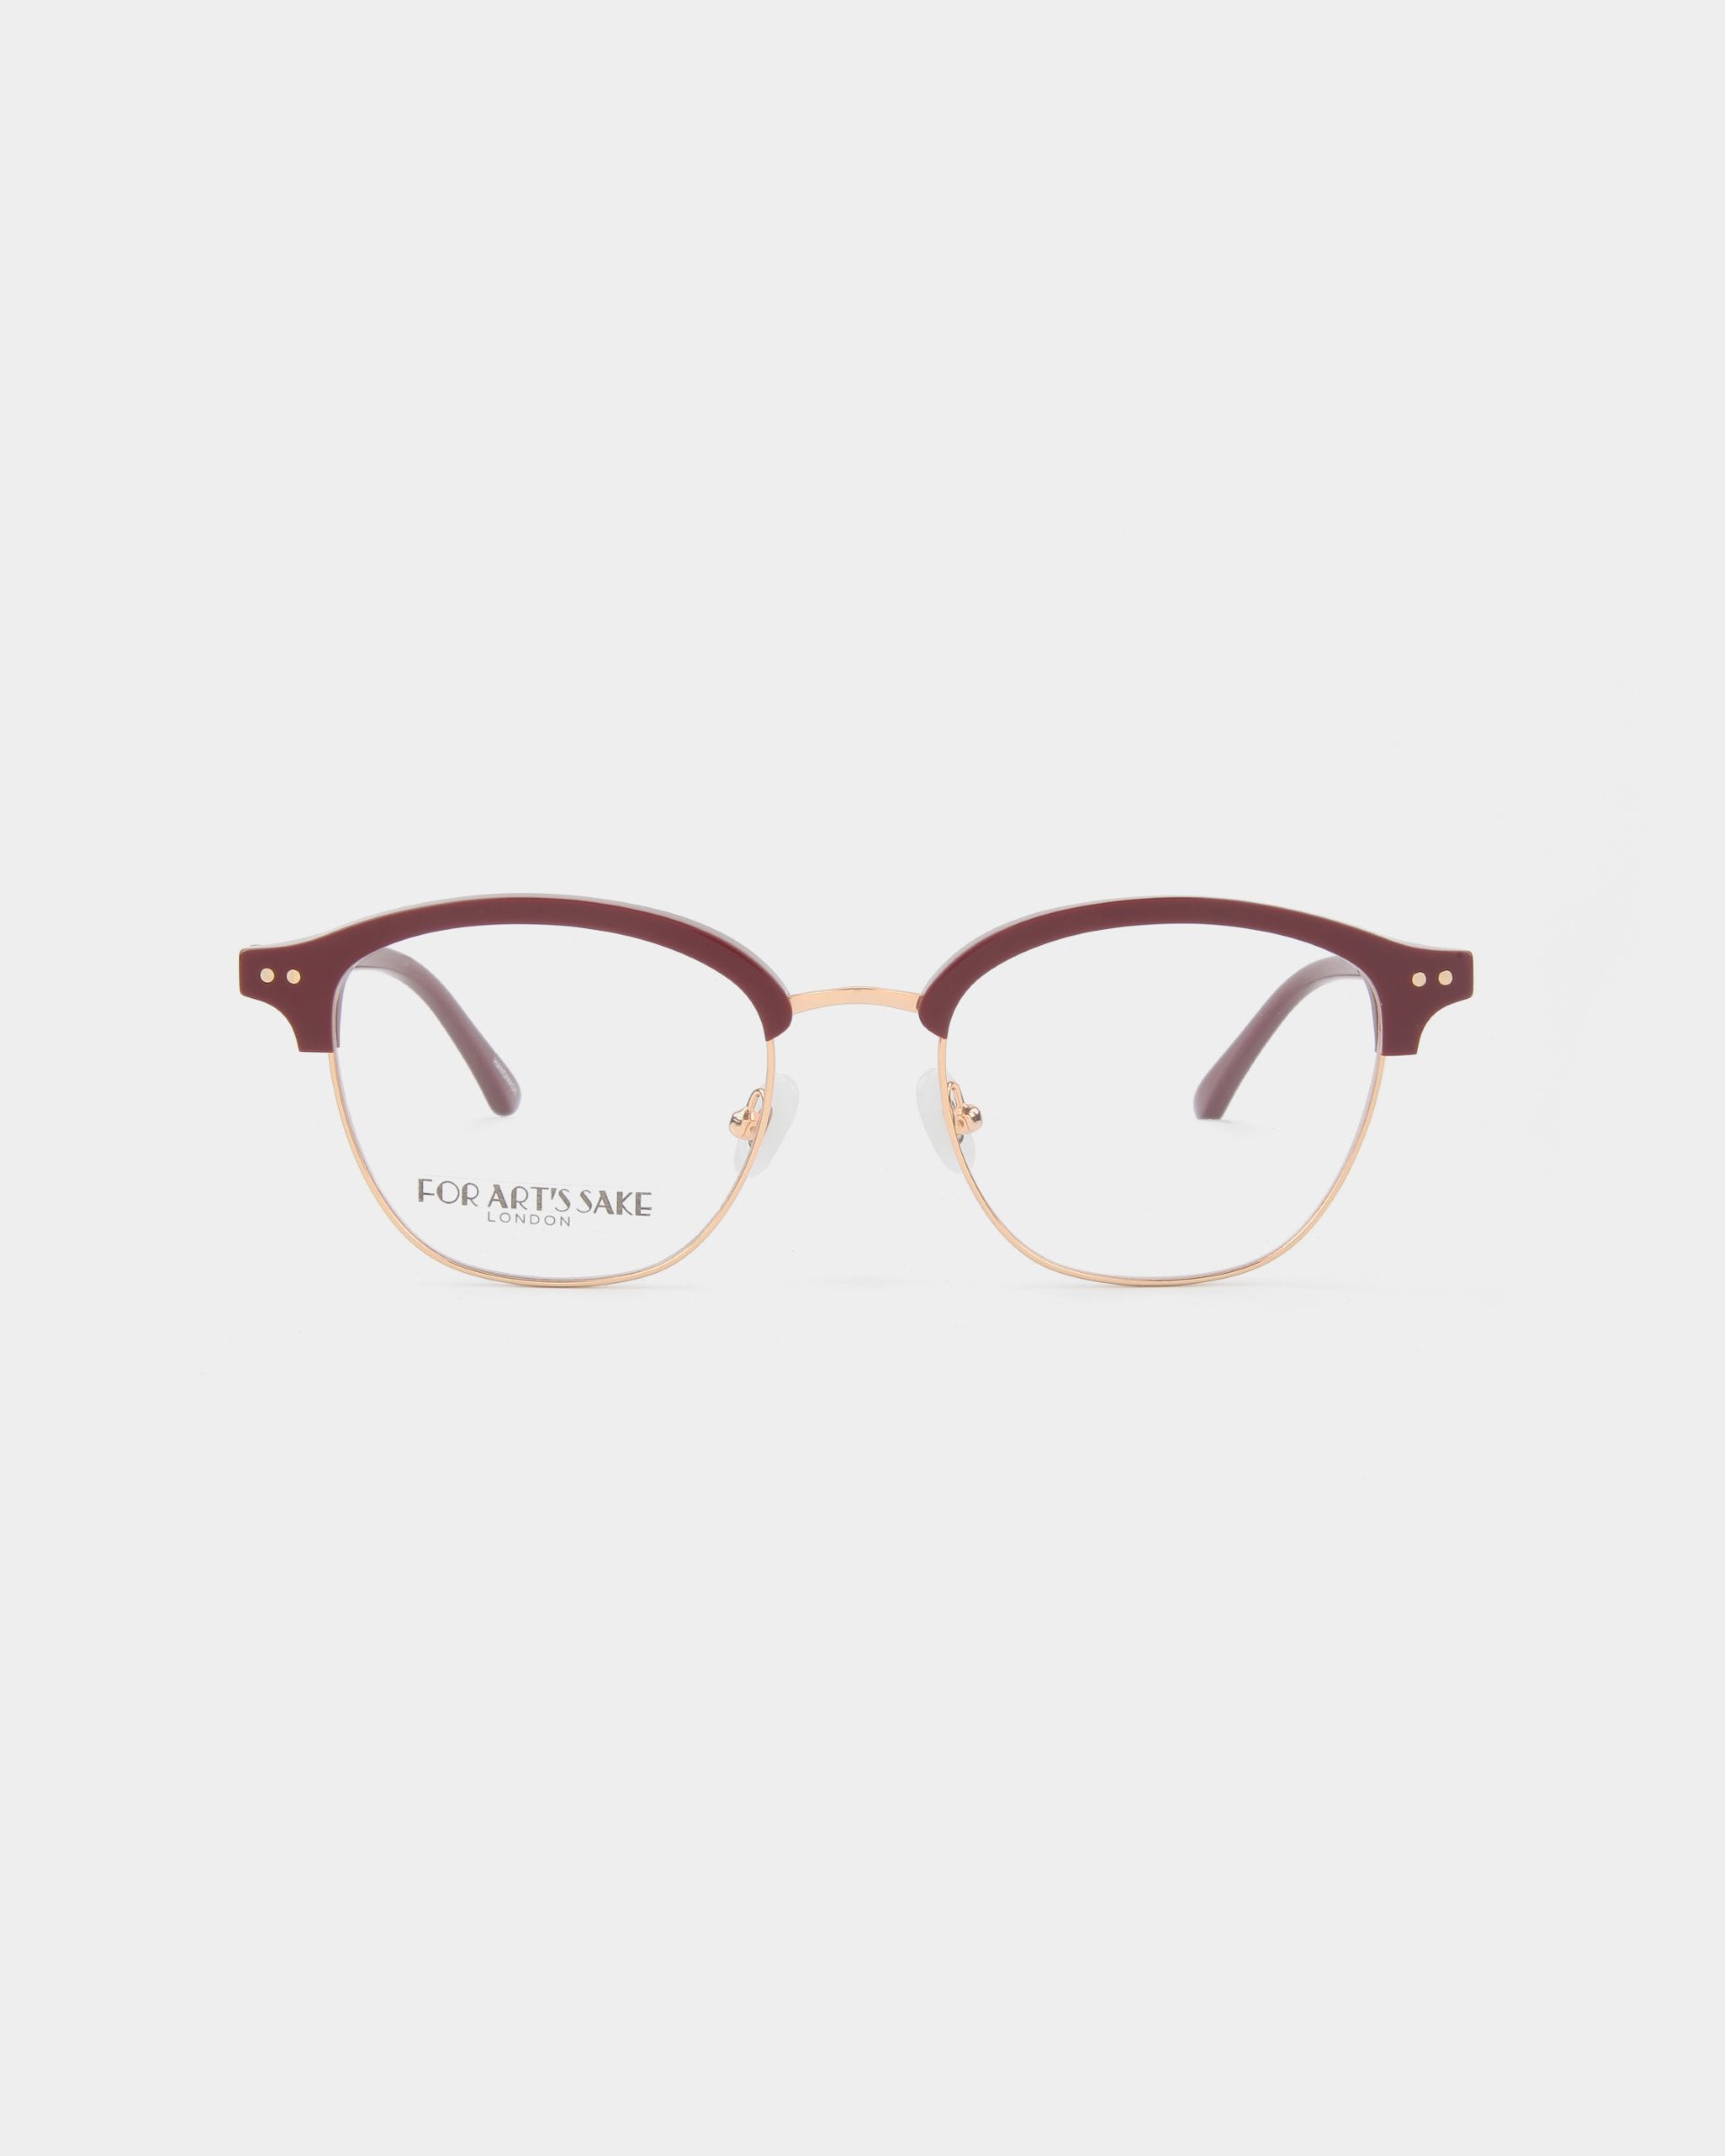 A pair of stylish eyeglasses with burgundy half-rim frames and gold accents on the temples. The clear lenses, featuring a subtle brand logo &quot;For Art&#39;s Sake®&quot; on the left lens, include a blue light filter for added eye comfort. The plain white background highlights the Painkiller beautifully.